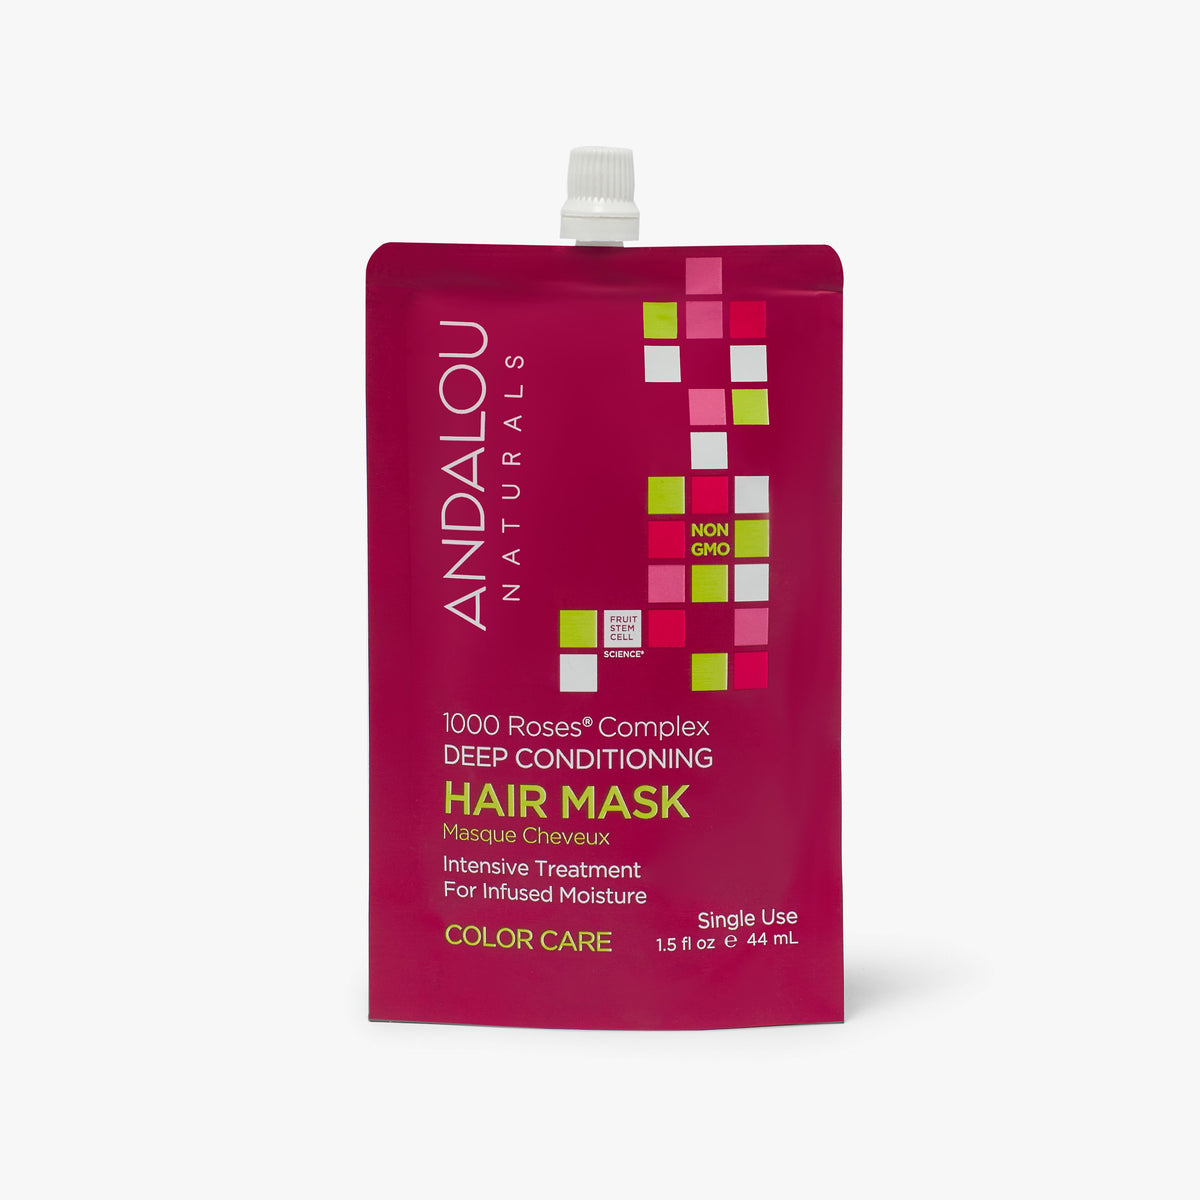 1000 Roses Complex Color Care Deep Conditioning Hair Mask - Andalou Naturals US